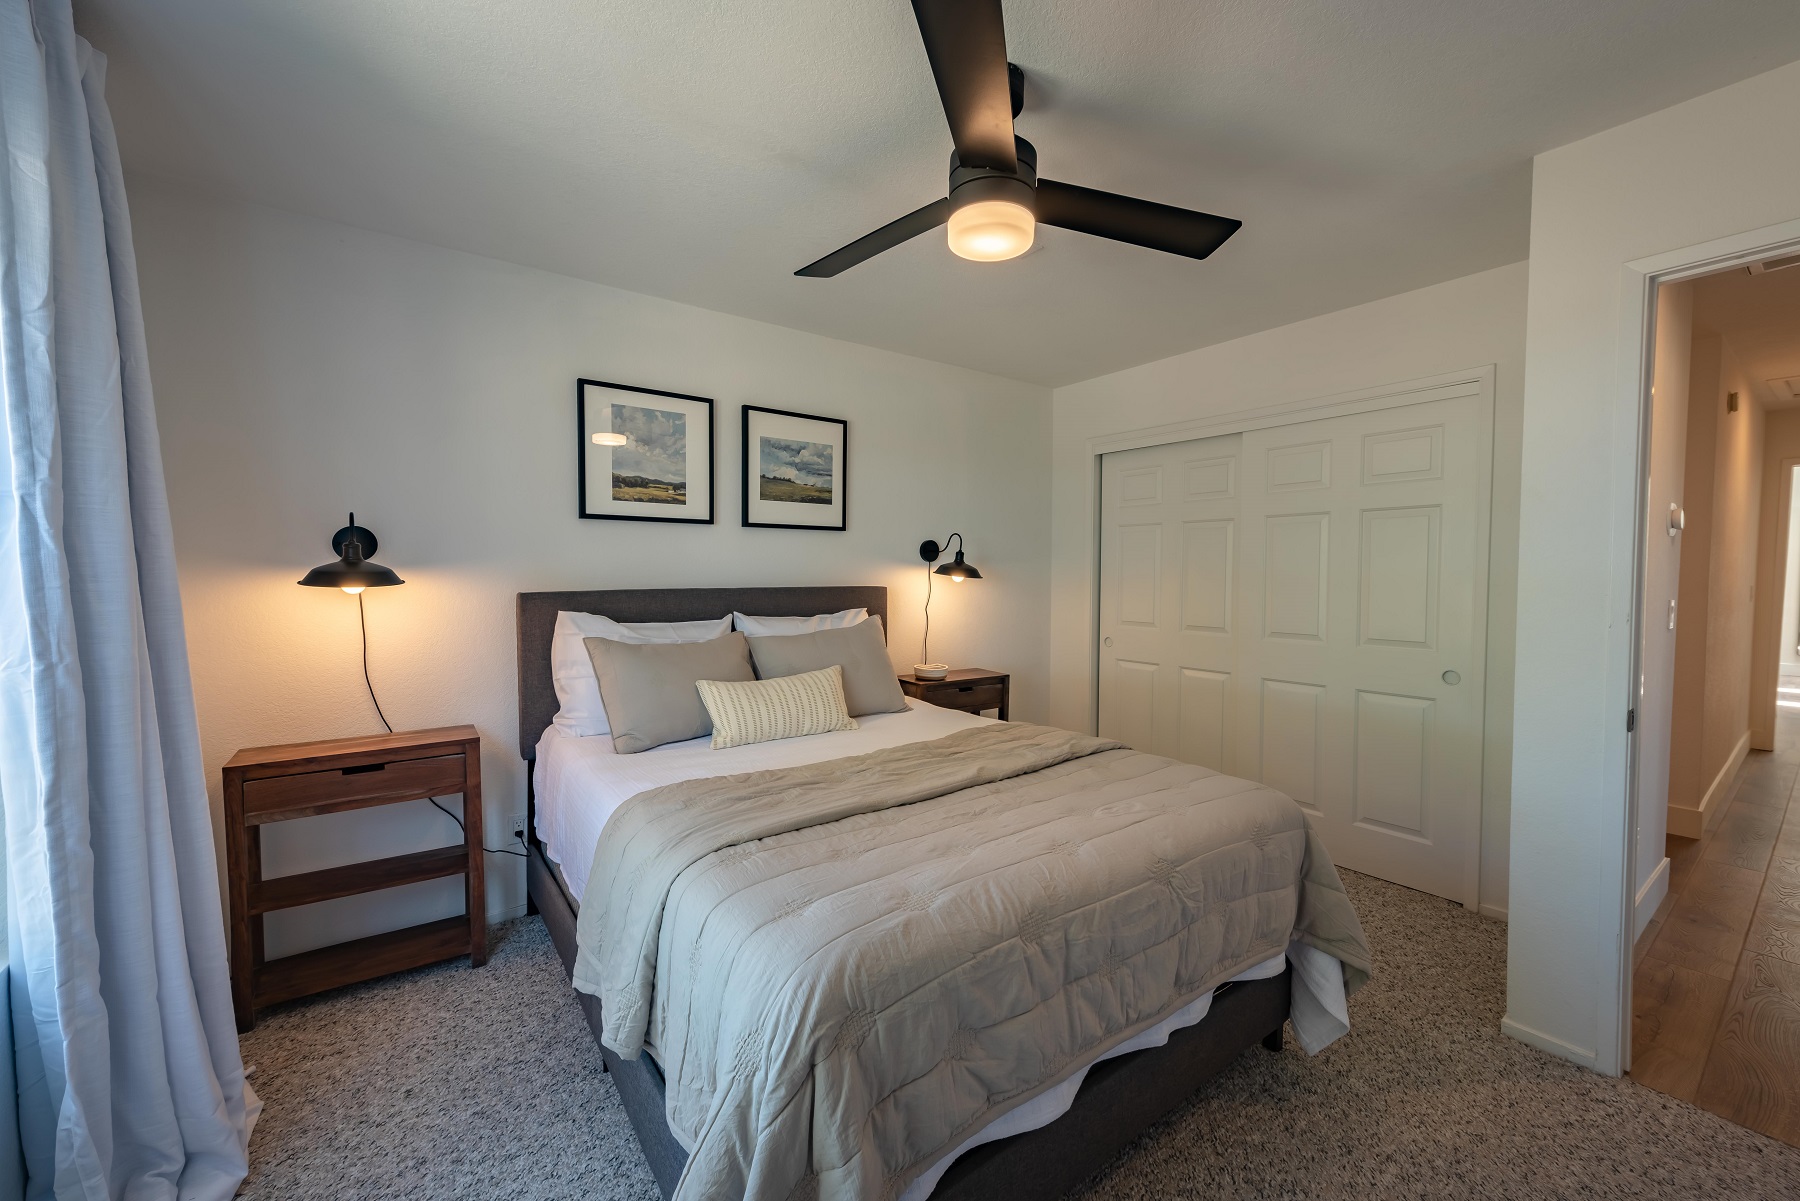 Bedroom 2 with queen bed and ceiling fan